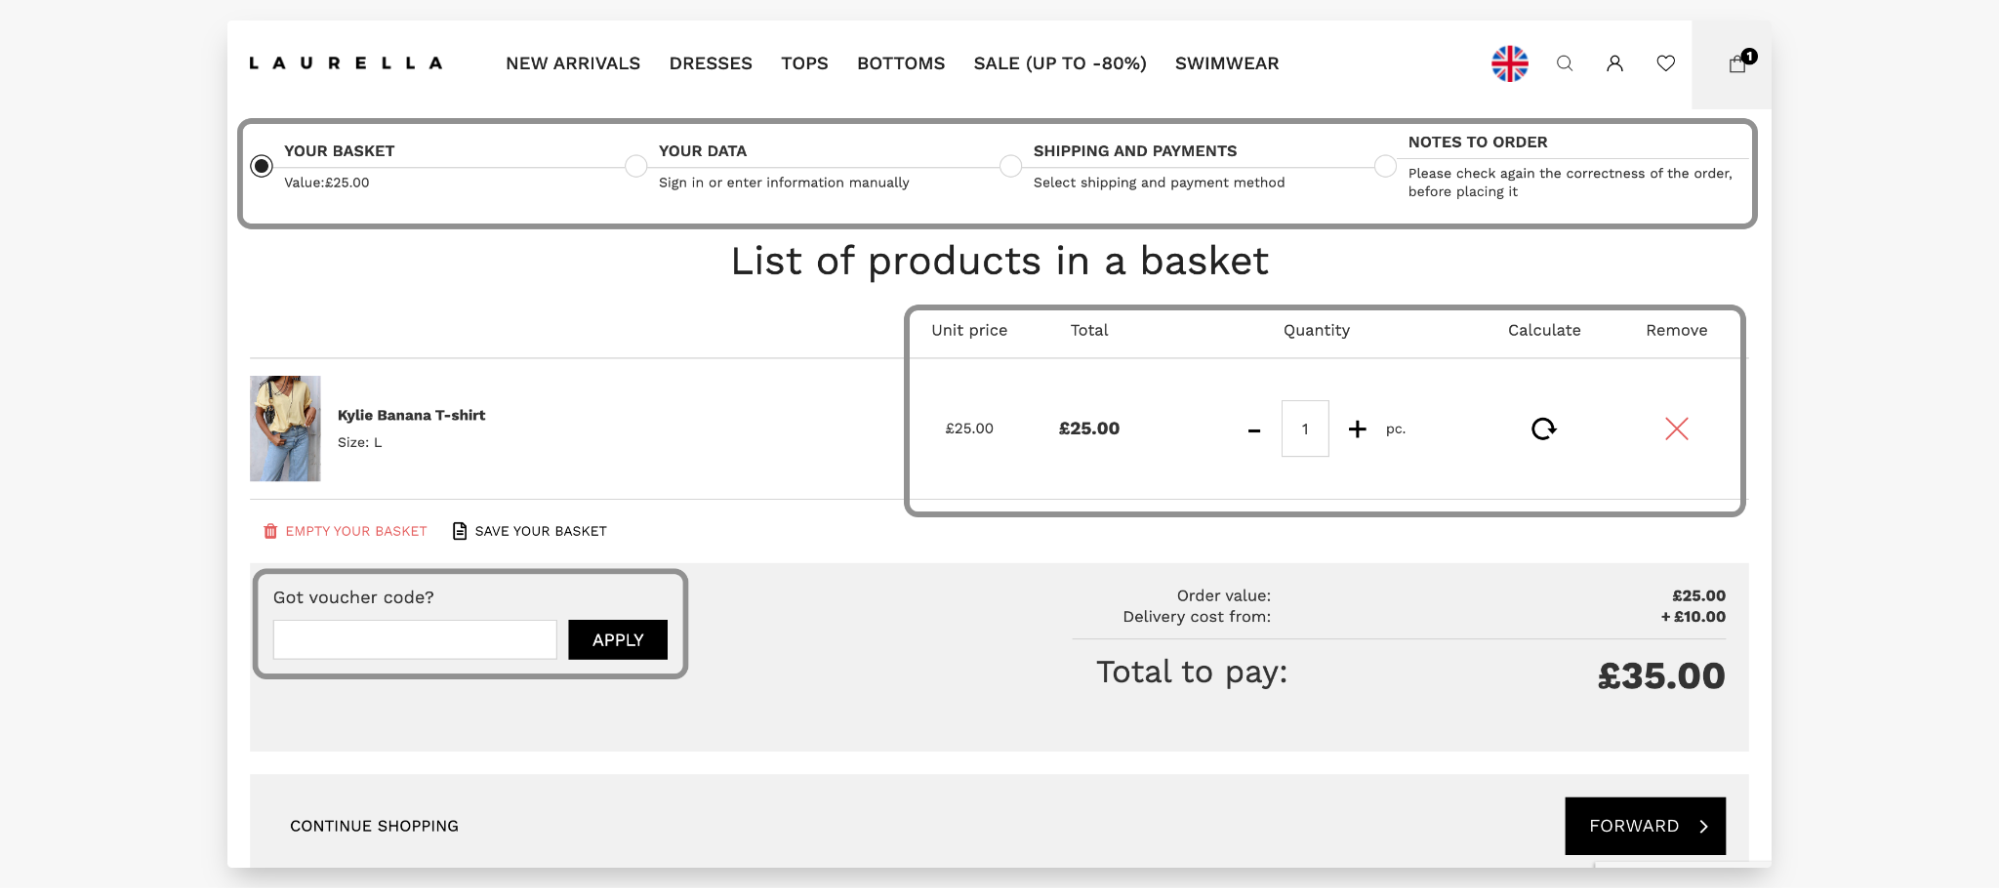 Laurella website - list of products in a basket